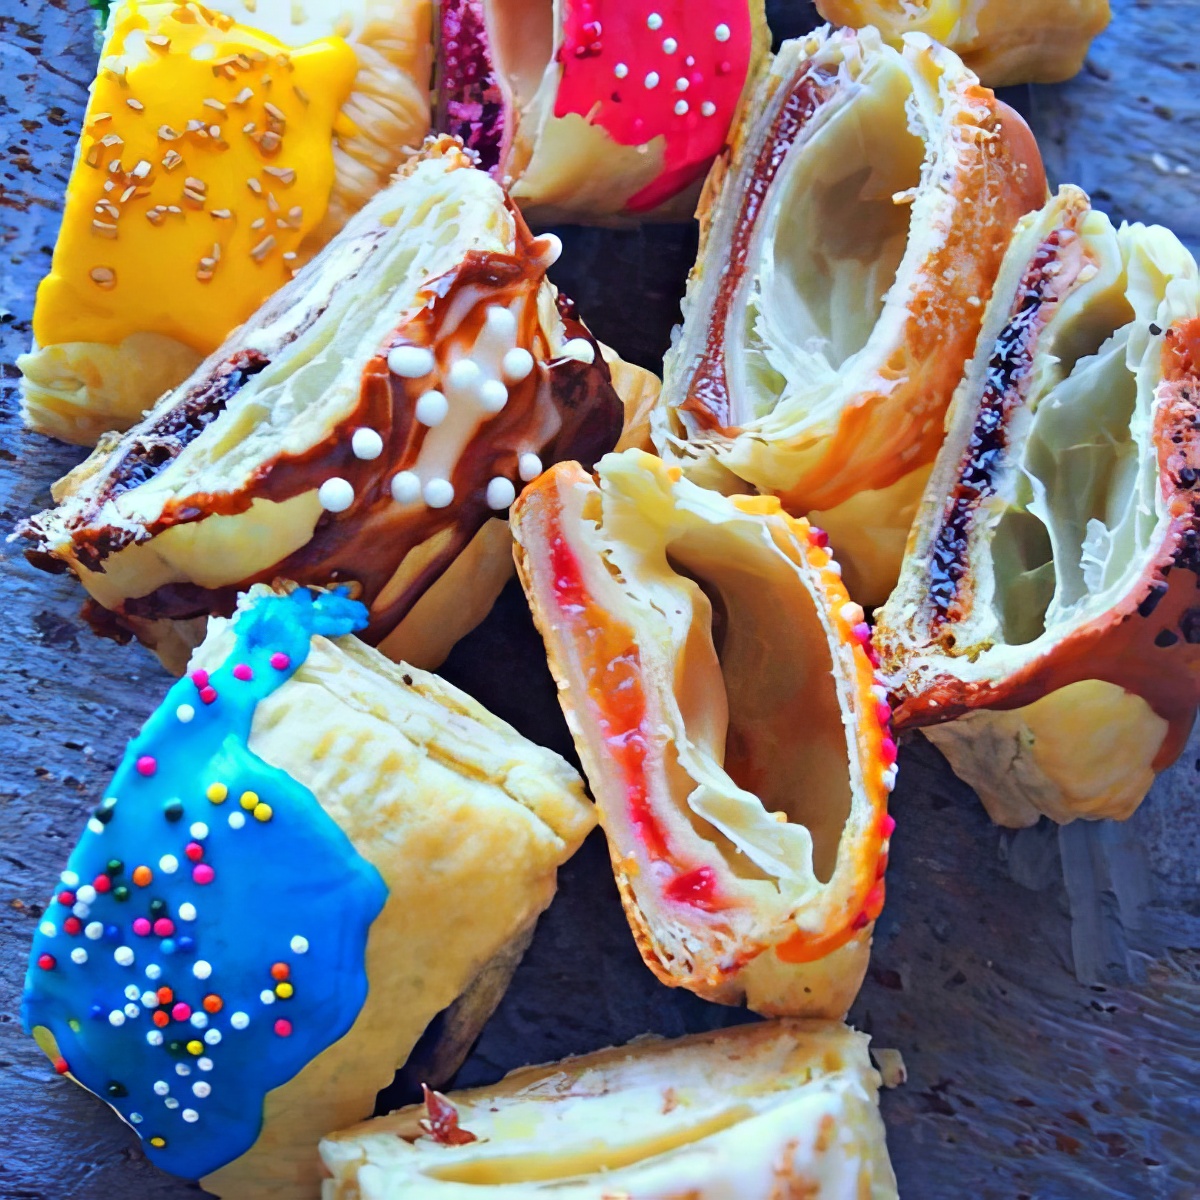 Easy and yummy colorful pastries recipe to try for breakfast with your kids 